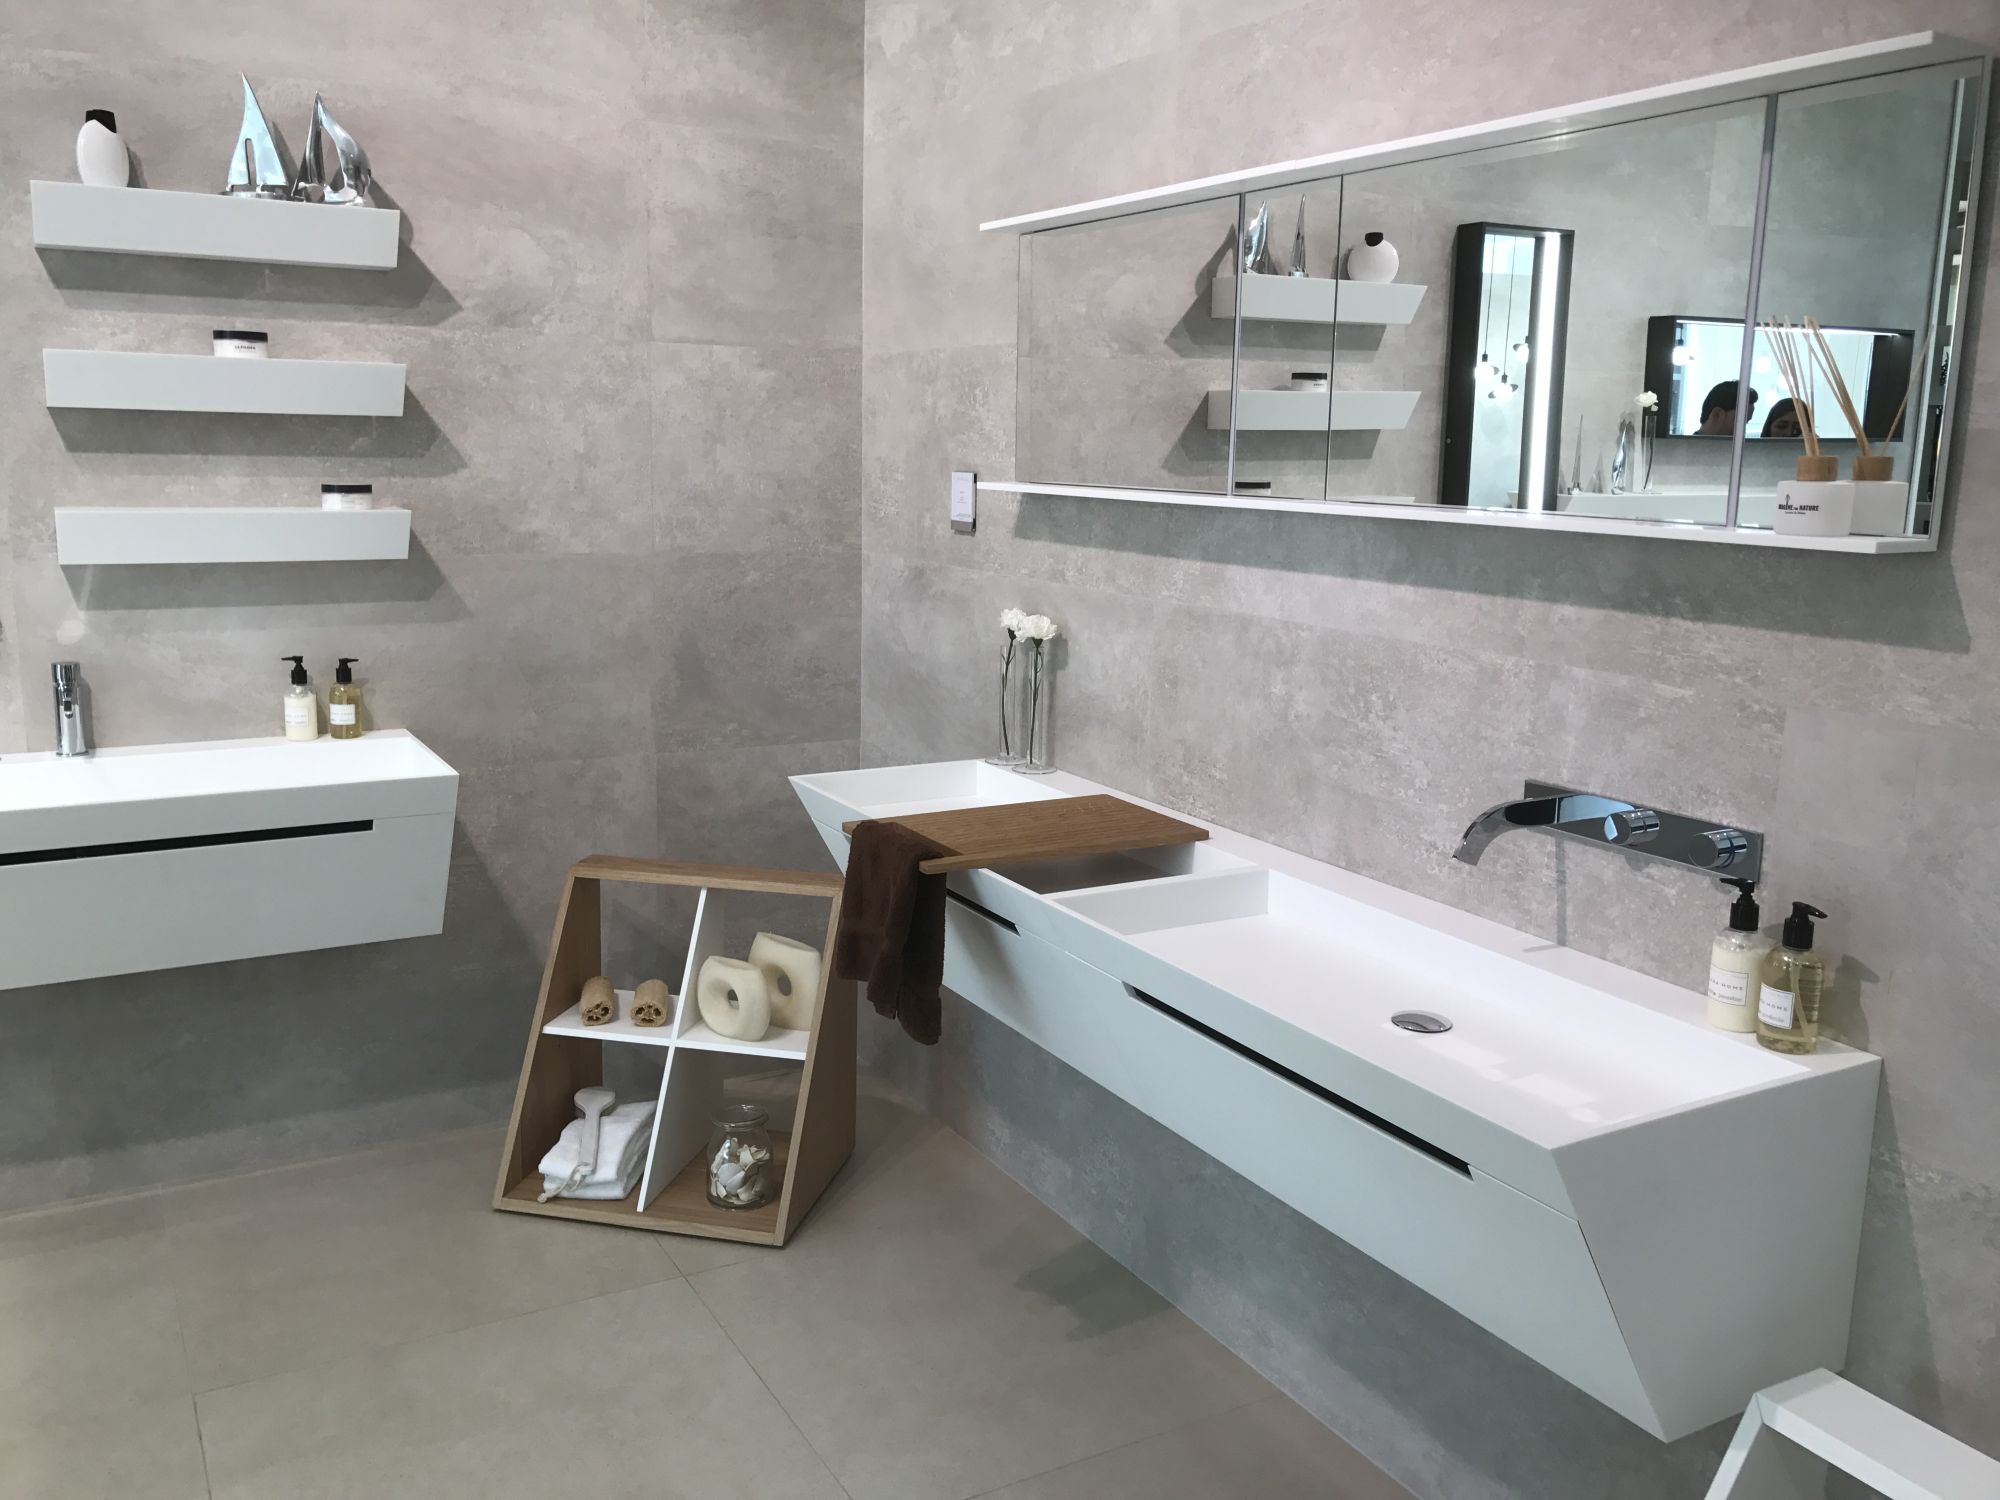 Modern white bathroom furniture with concrete looking tiles on the walls - GamaDecor